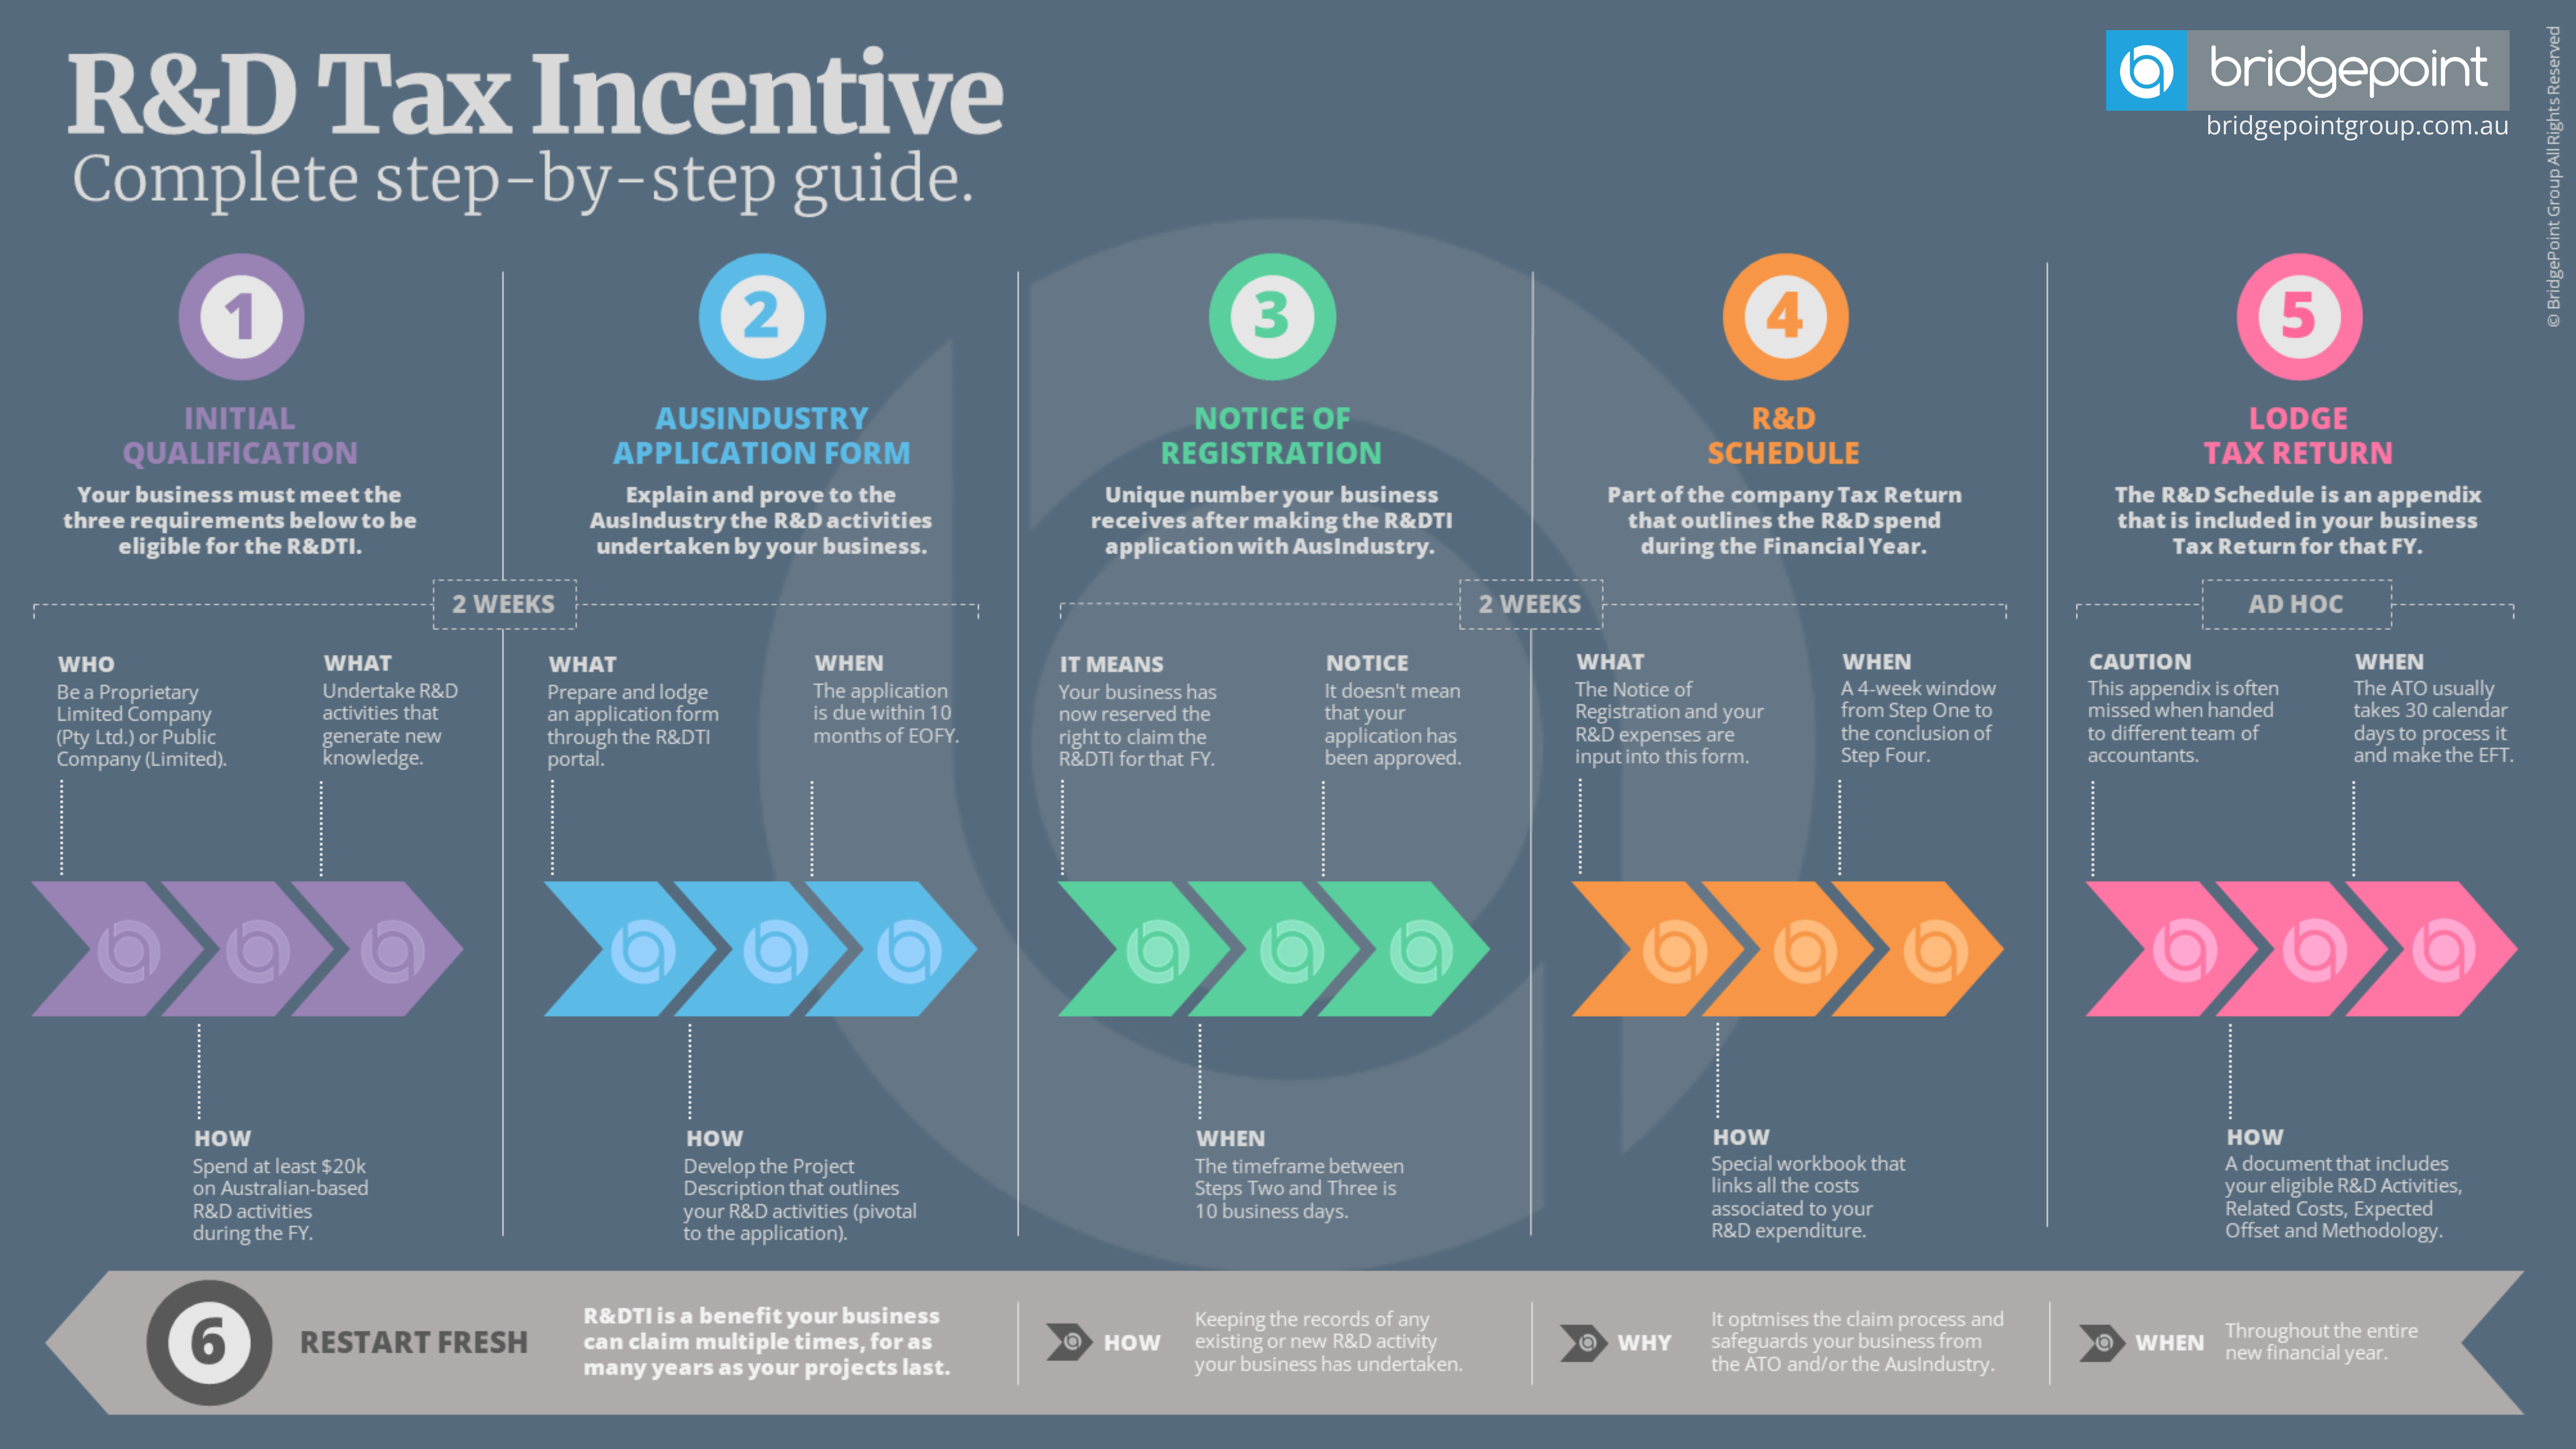 How-to-apply-RD-Tax-Incentive-Guide